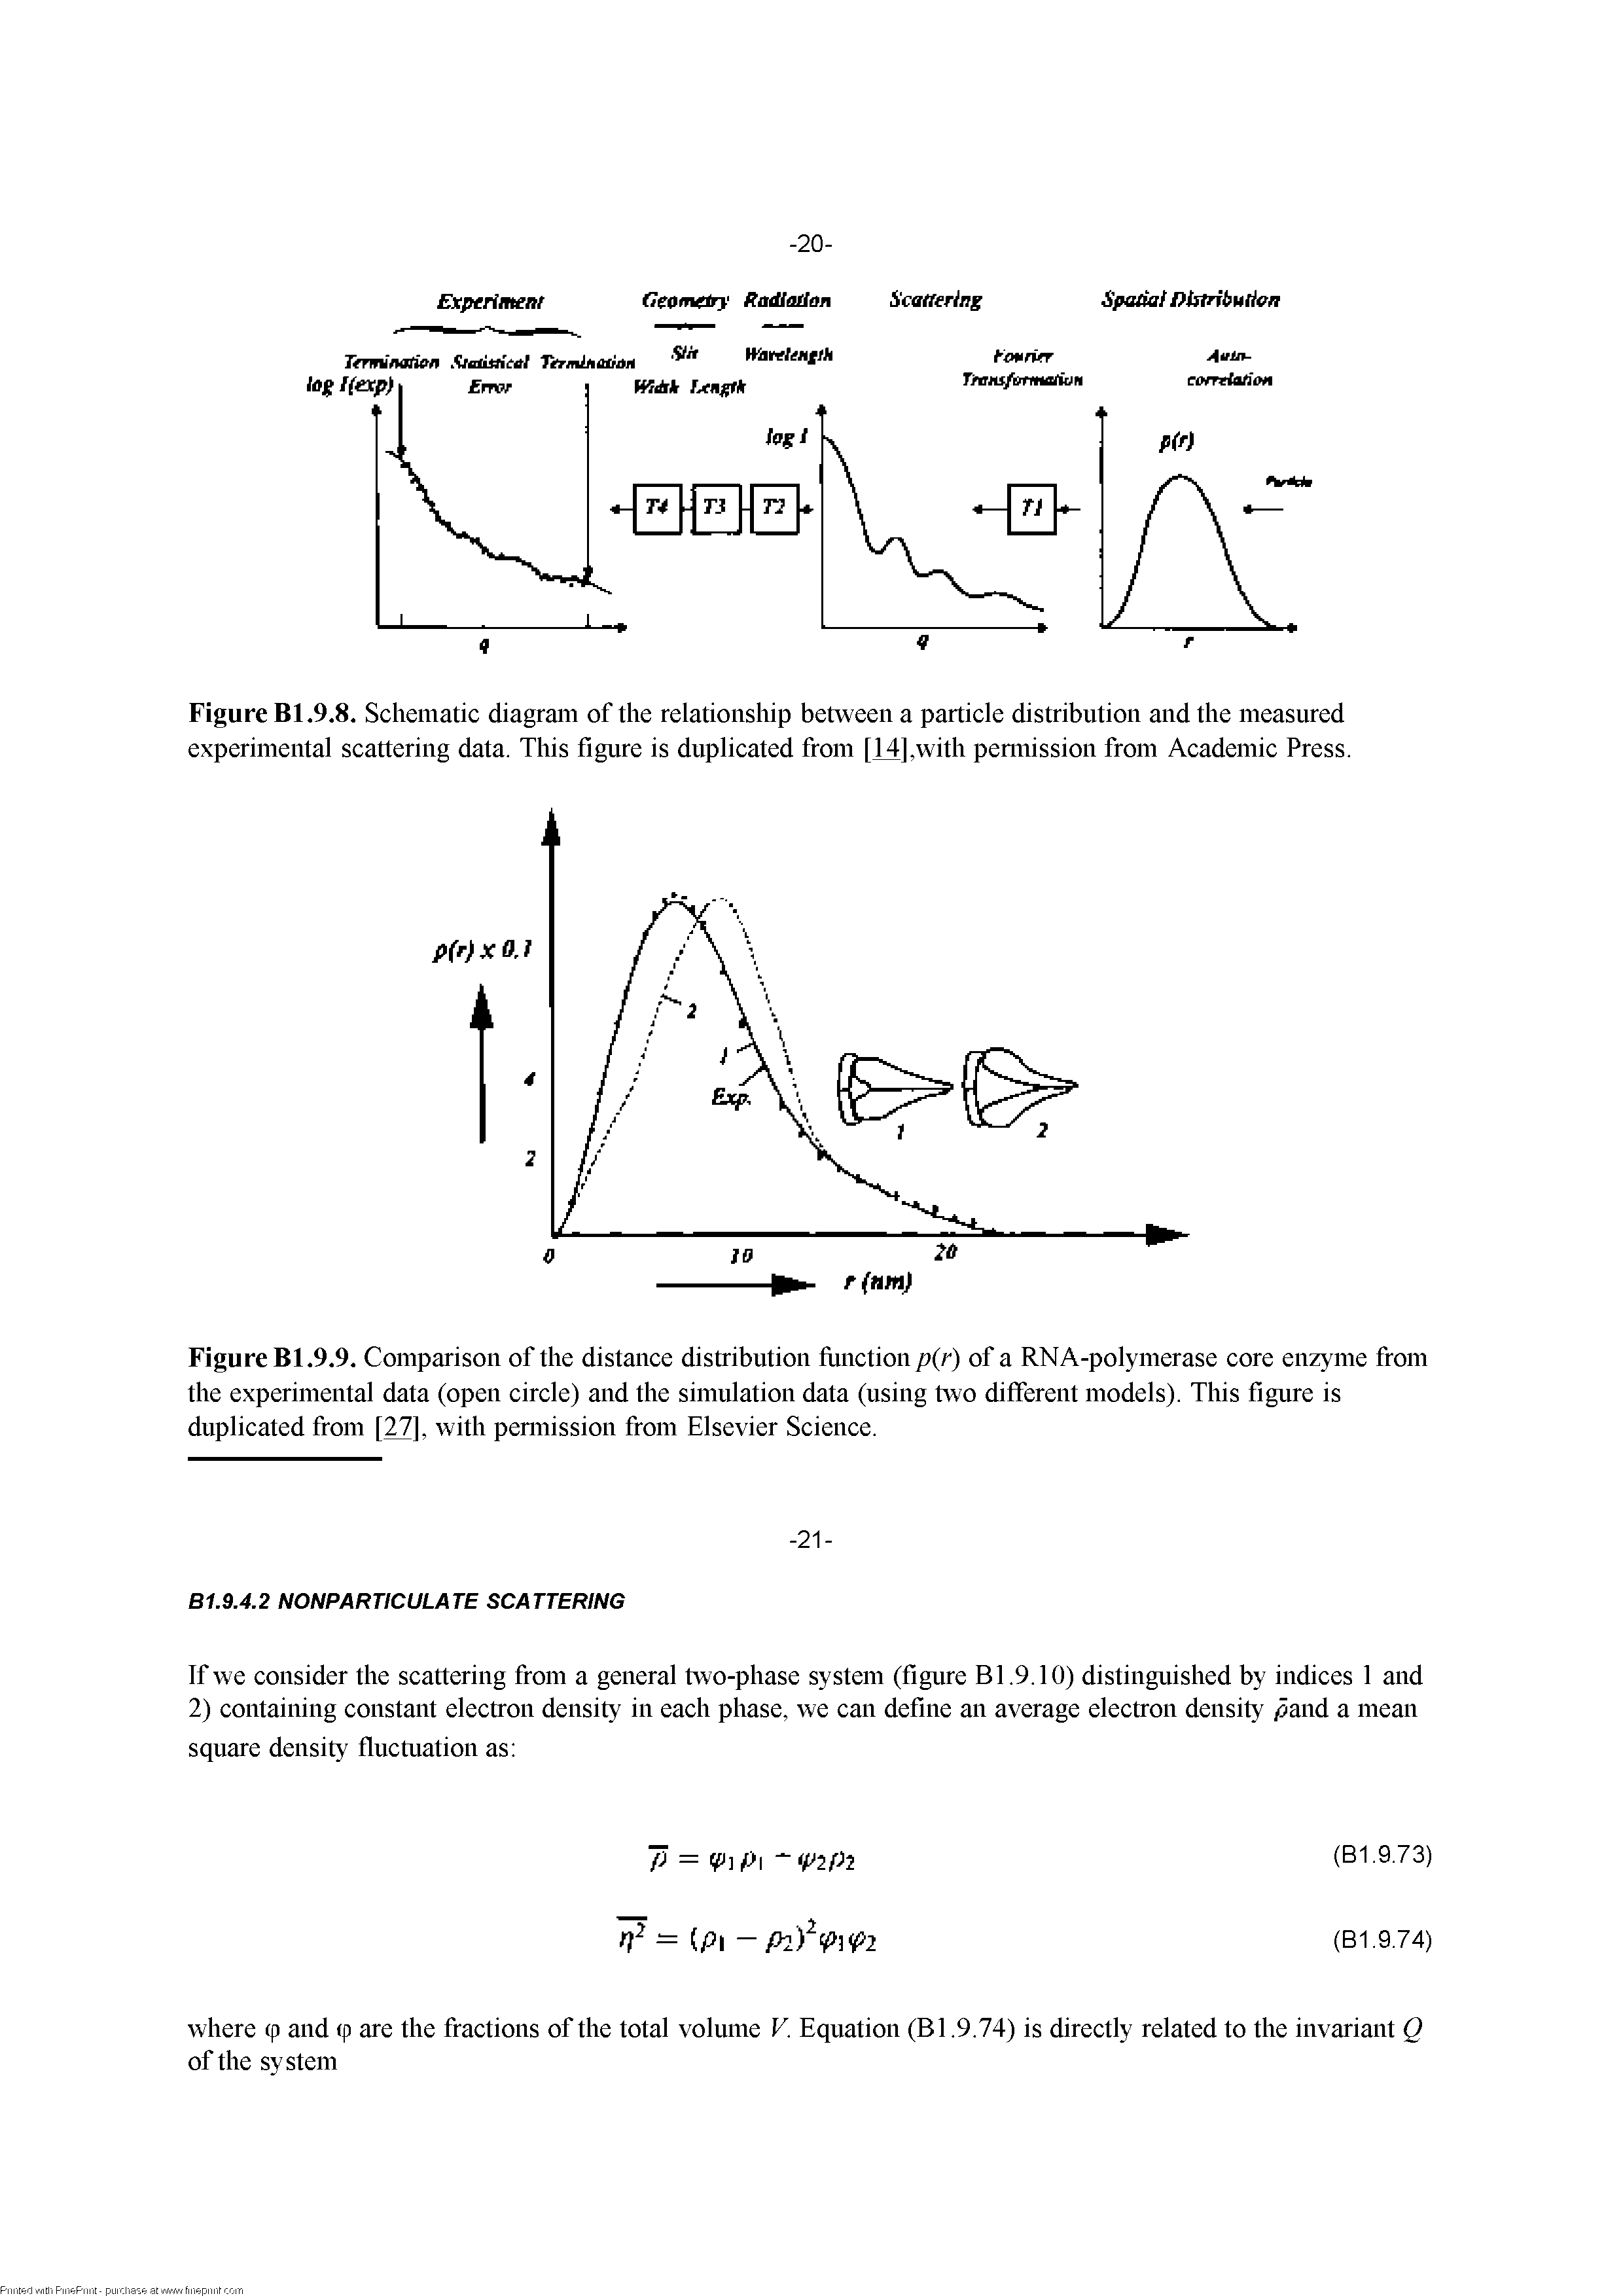 Figure Bl.9.8. Schematic diagram of the relationship between a particle distribution and the measured experimental scattering data. This figure is duplicated from [14],with pennission from Academic Press.